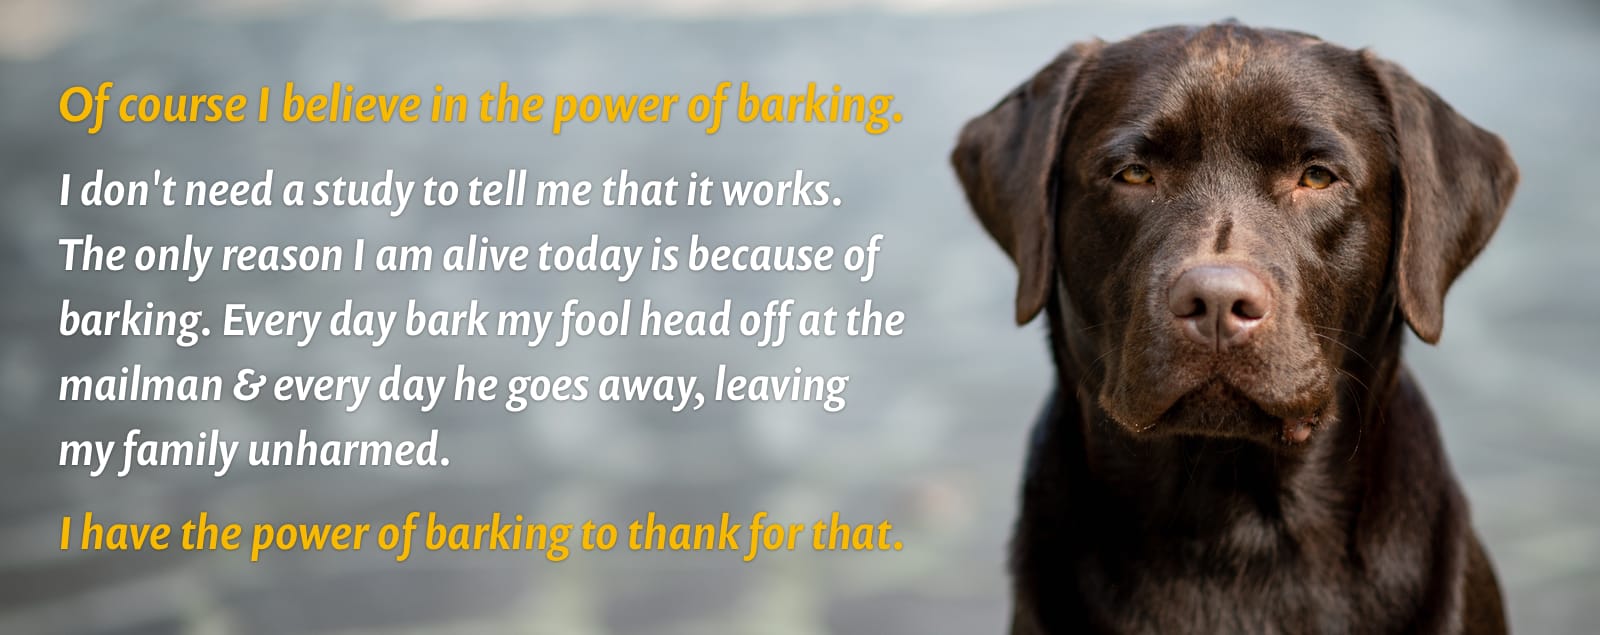 A picture of a handsome, serious-looking chocolate lab, with the caption: “Of course I believe in the power of barking. I don’t need a study to tell me that it works. The only reason I am alive today is because of barking. Every day I bark my fool head off at the mailman. Every day he goes away, leaving my family unharmed.